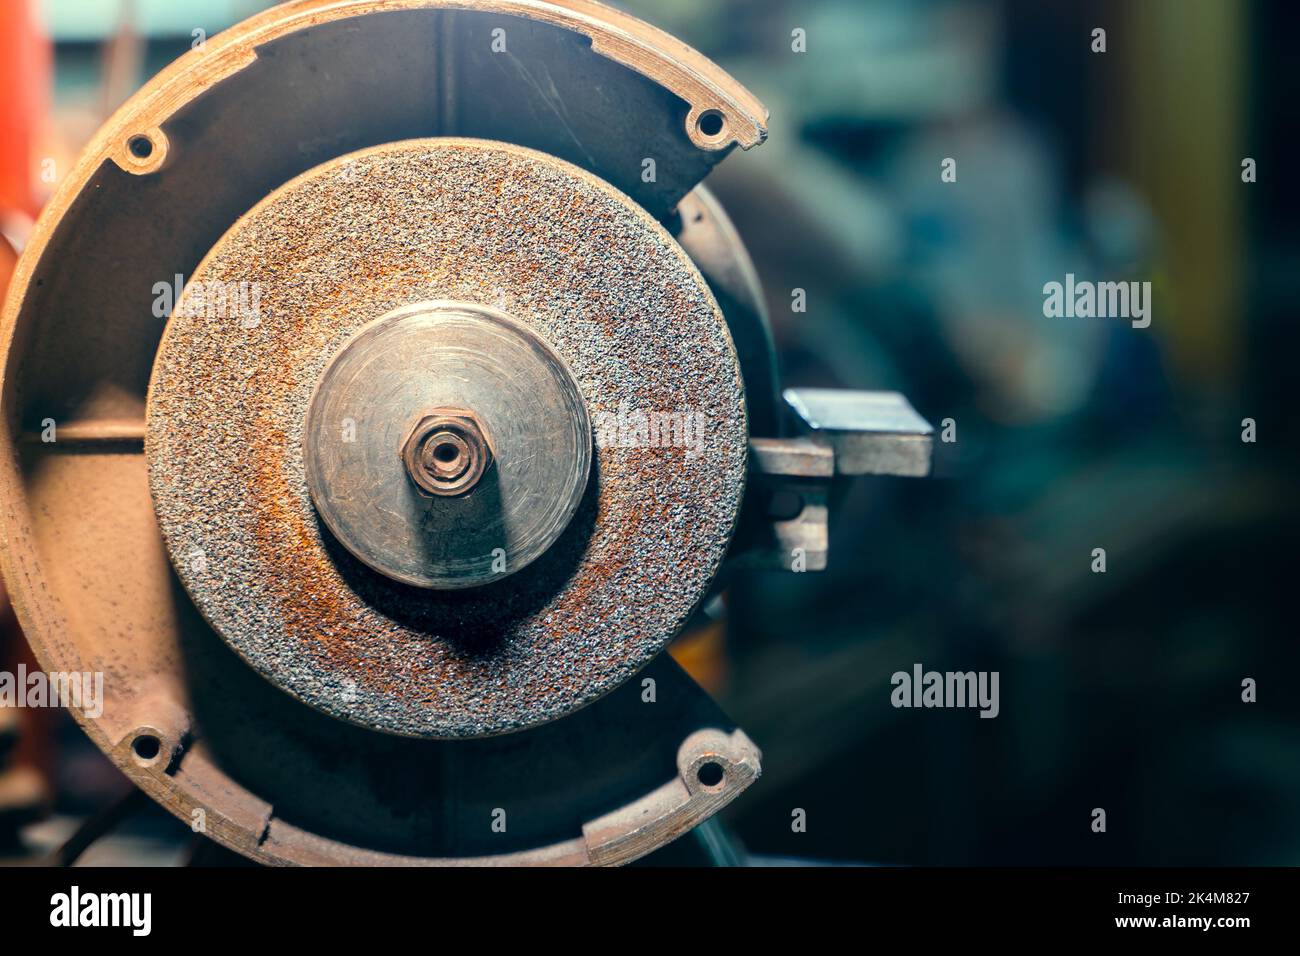 https://c8.alamy.com/comp/2K4M827/grinding-wheel-on-a-grinder-close-up-on-a-blurred-background-machine-for-sharpening-tools-and-parts-abrasive-nozzle-2K4M827.jpg